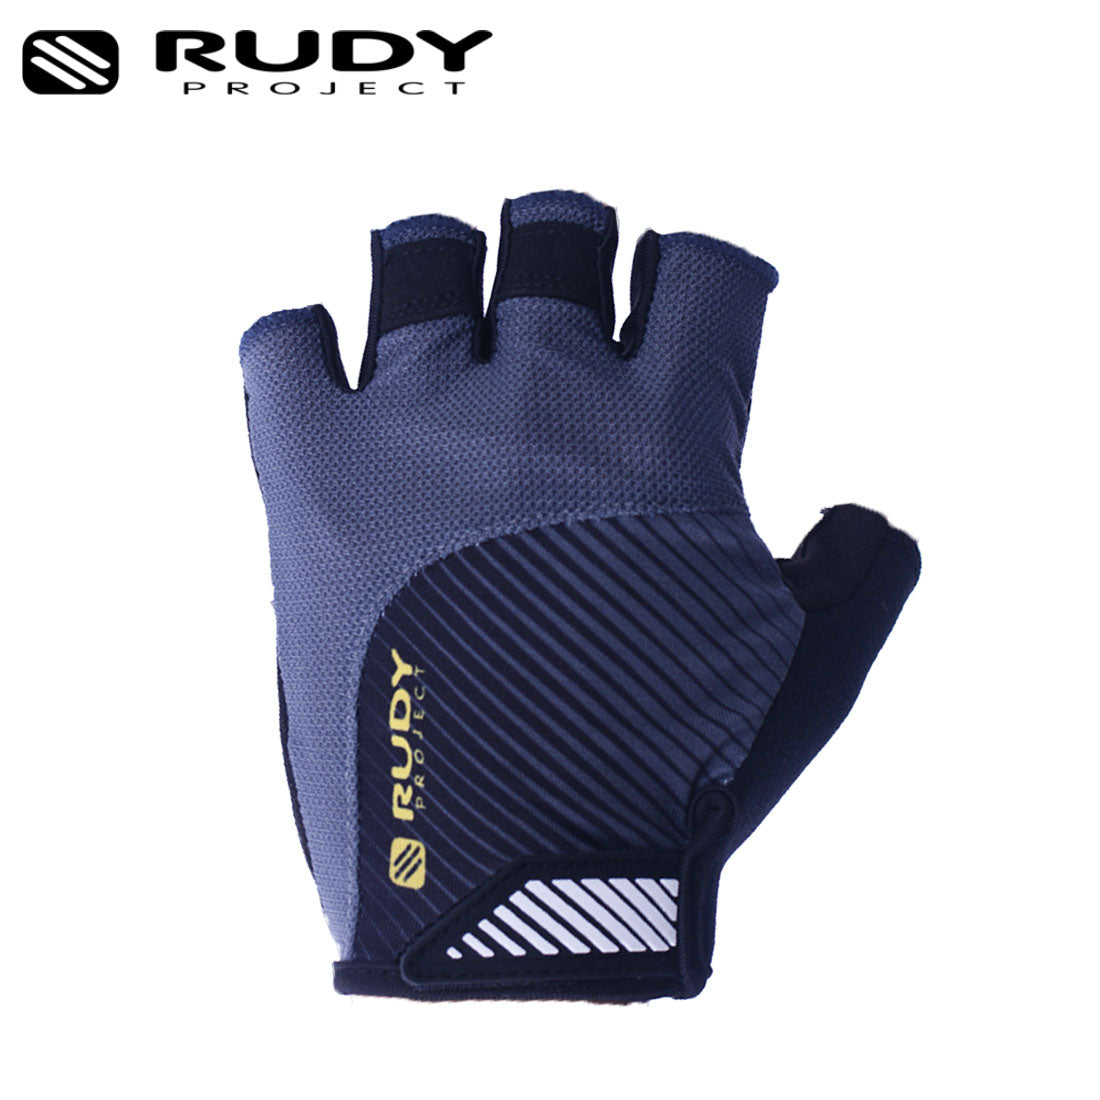 Rudy Project NEW Bike Gloves in Black-Grey-Yellow for Cycling Sports